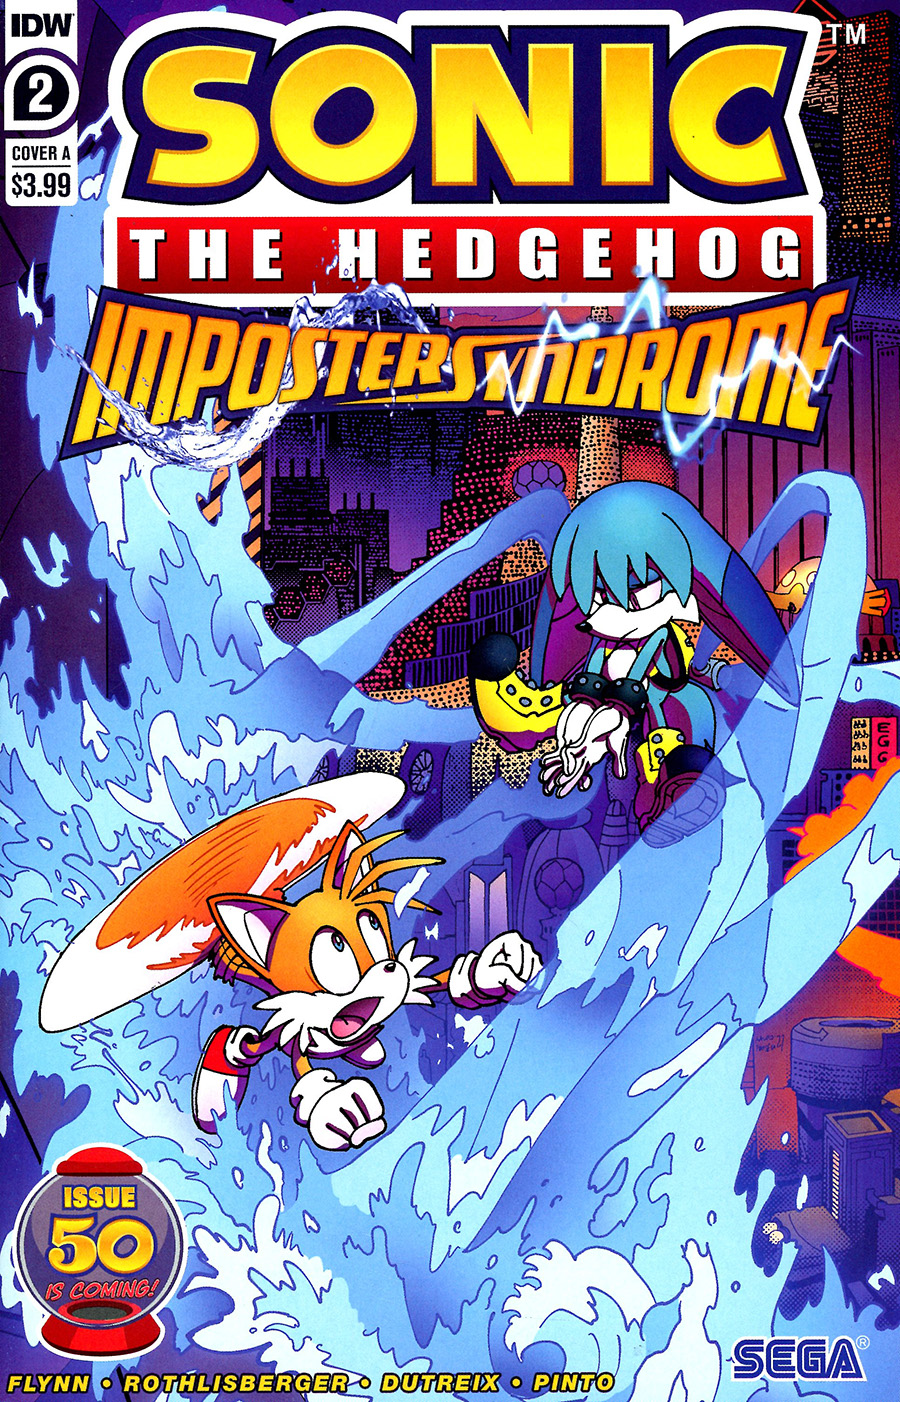 Sonic The Hedgehog Imposter Syndrome #2 Cover A Regular Mauro Fonseca Cover